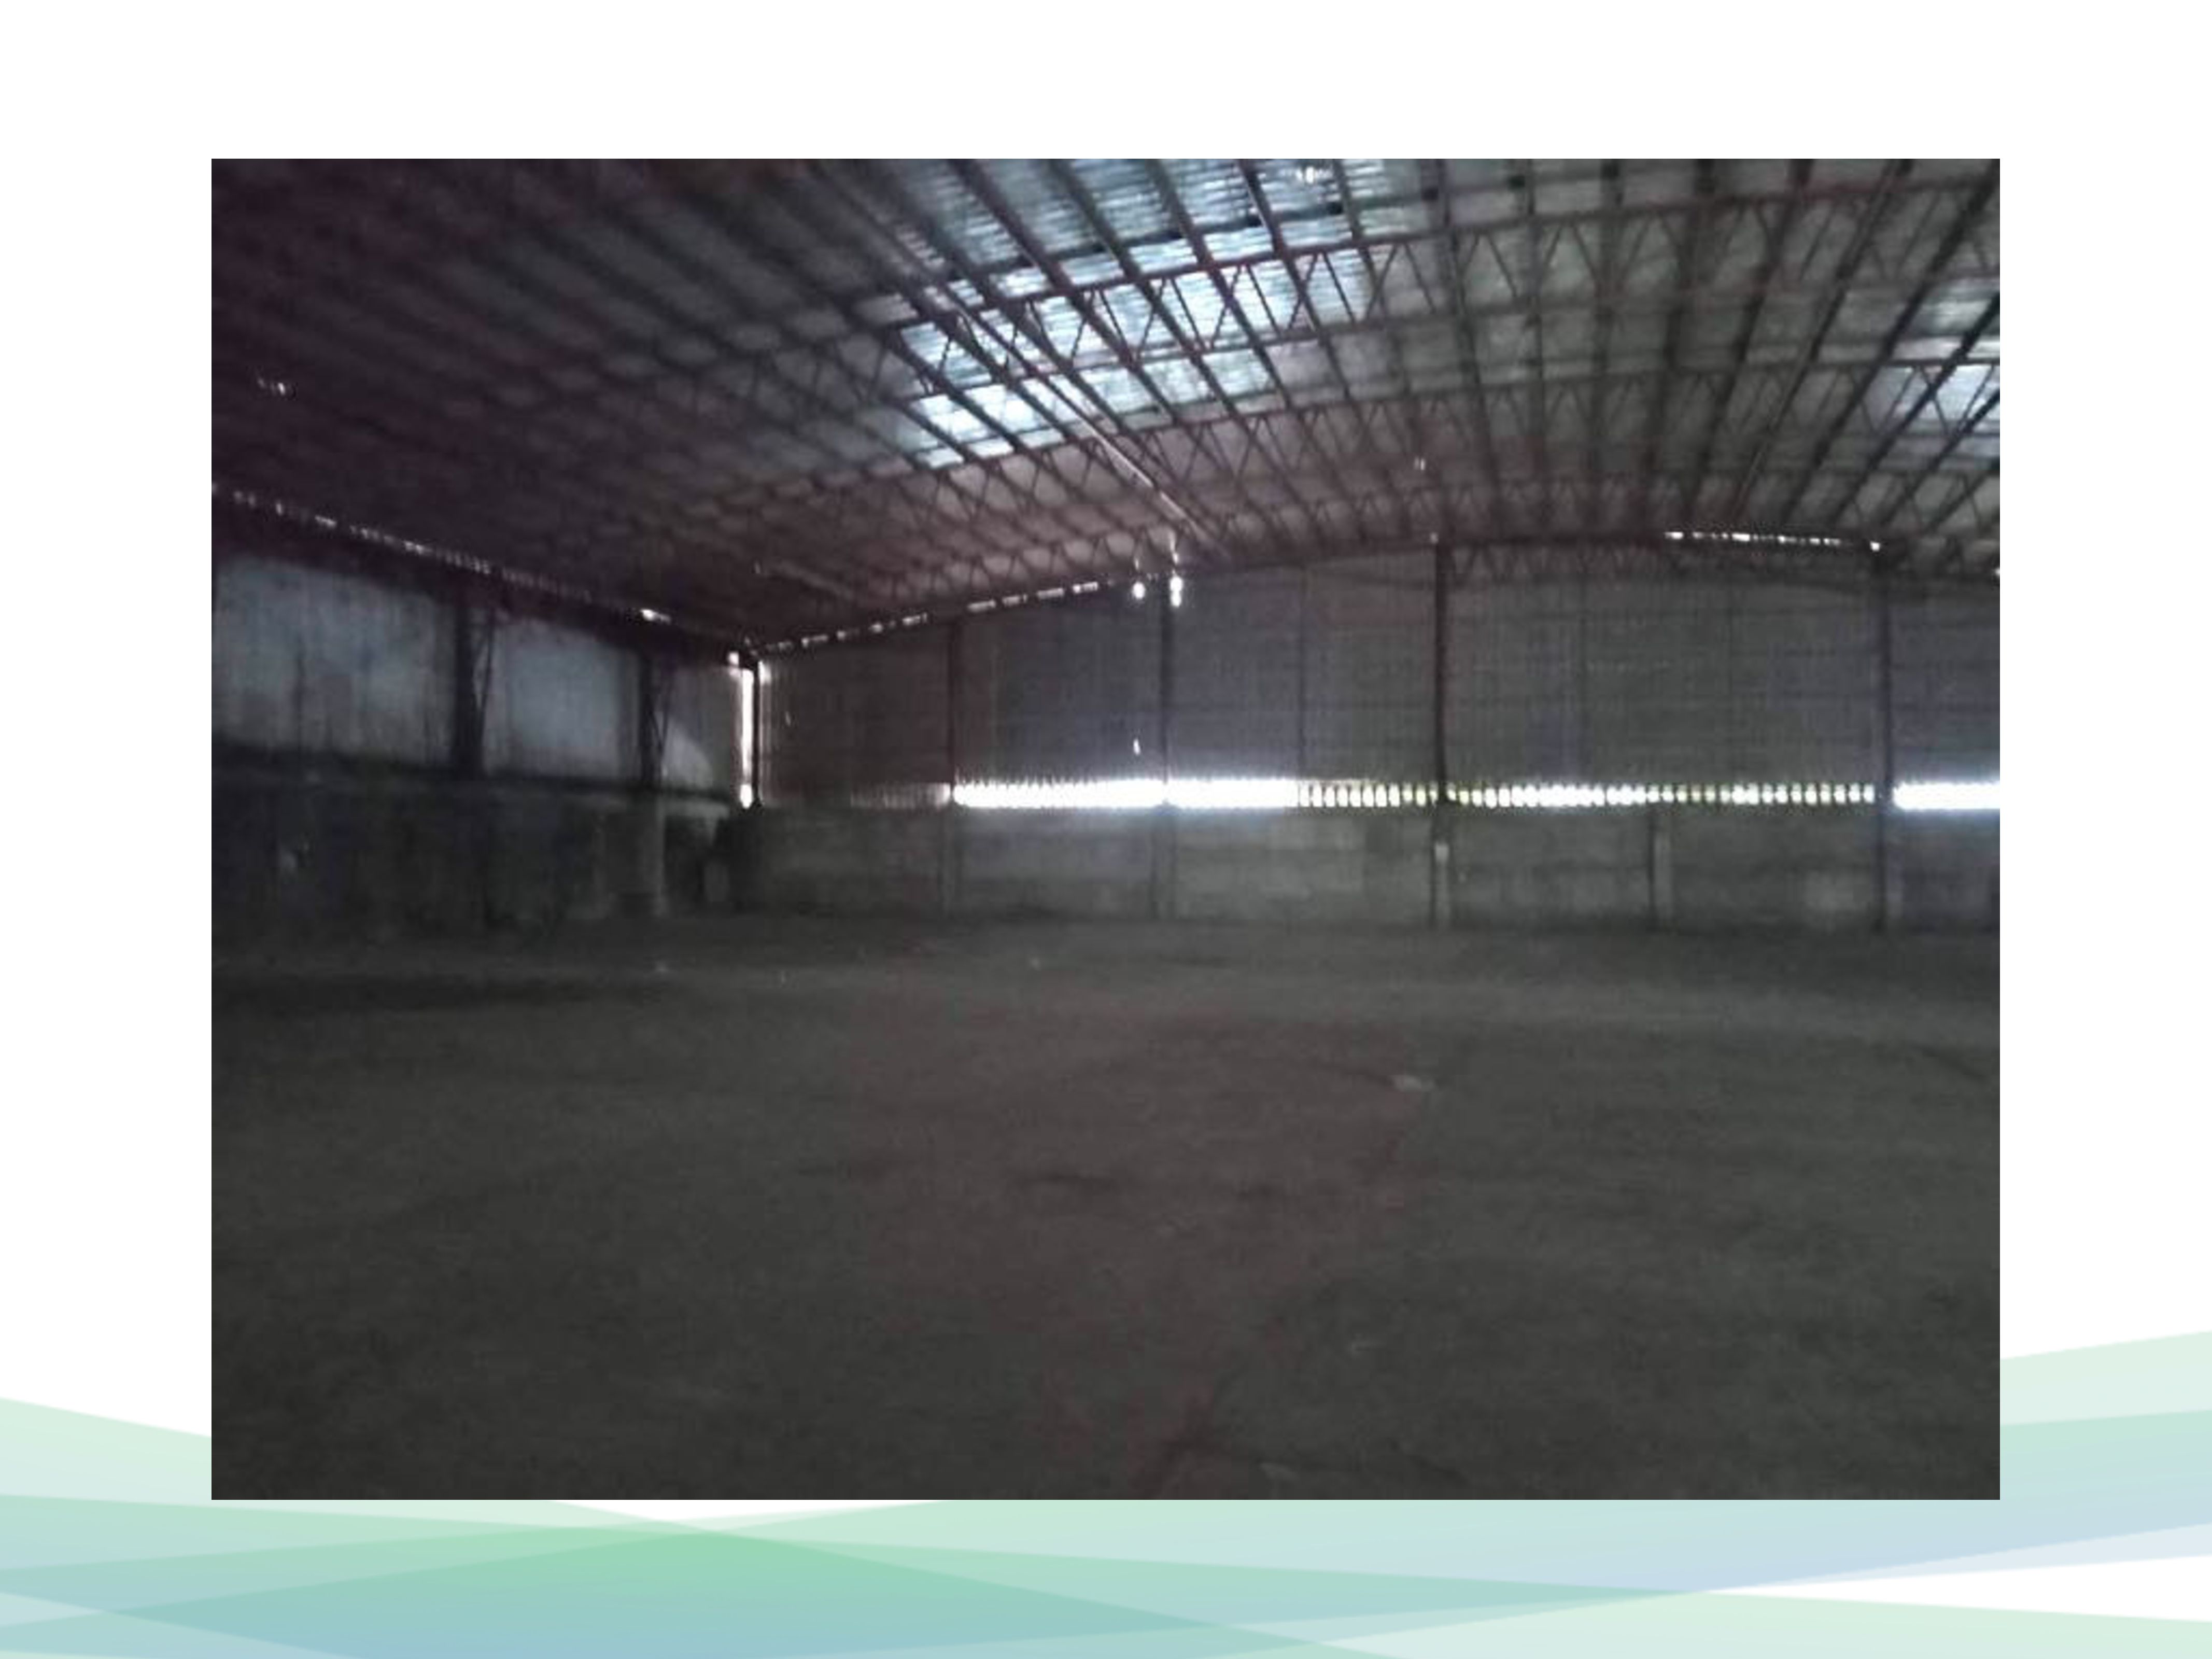 1600-sqm-warehouse-for-lease-in-narra-palawan